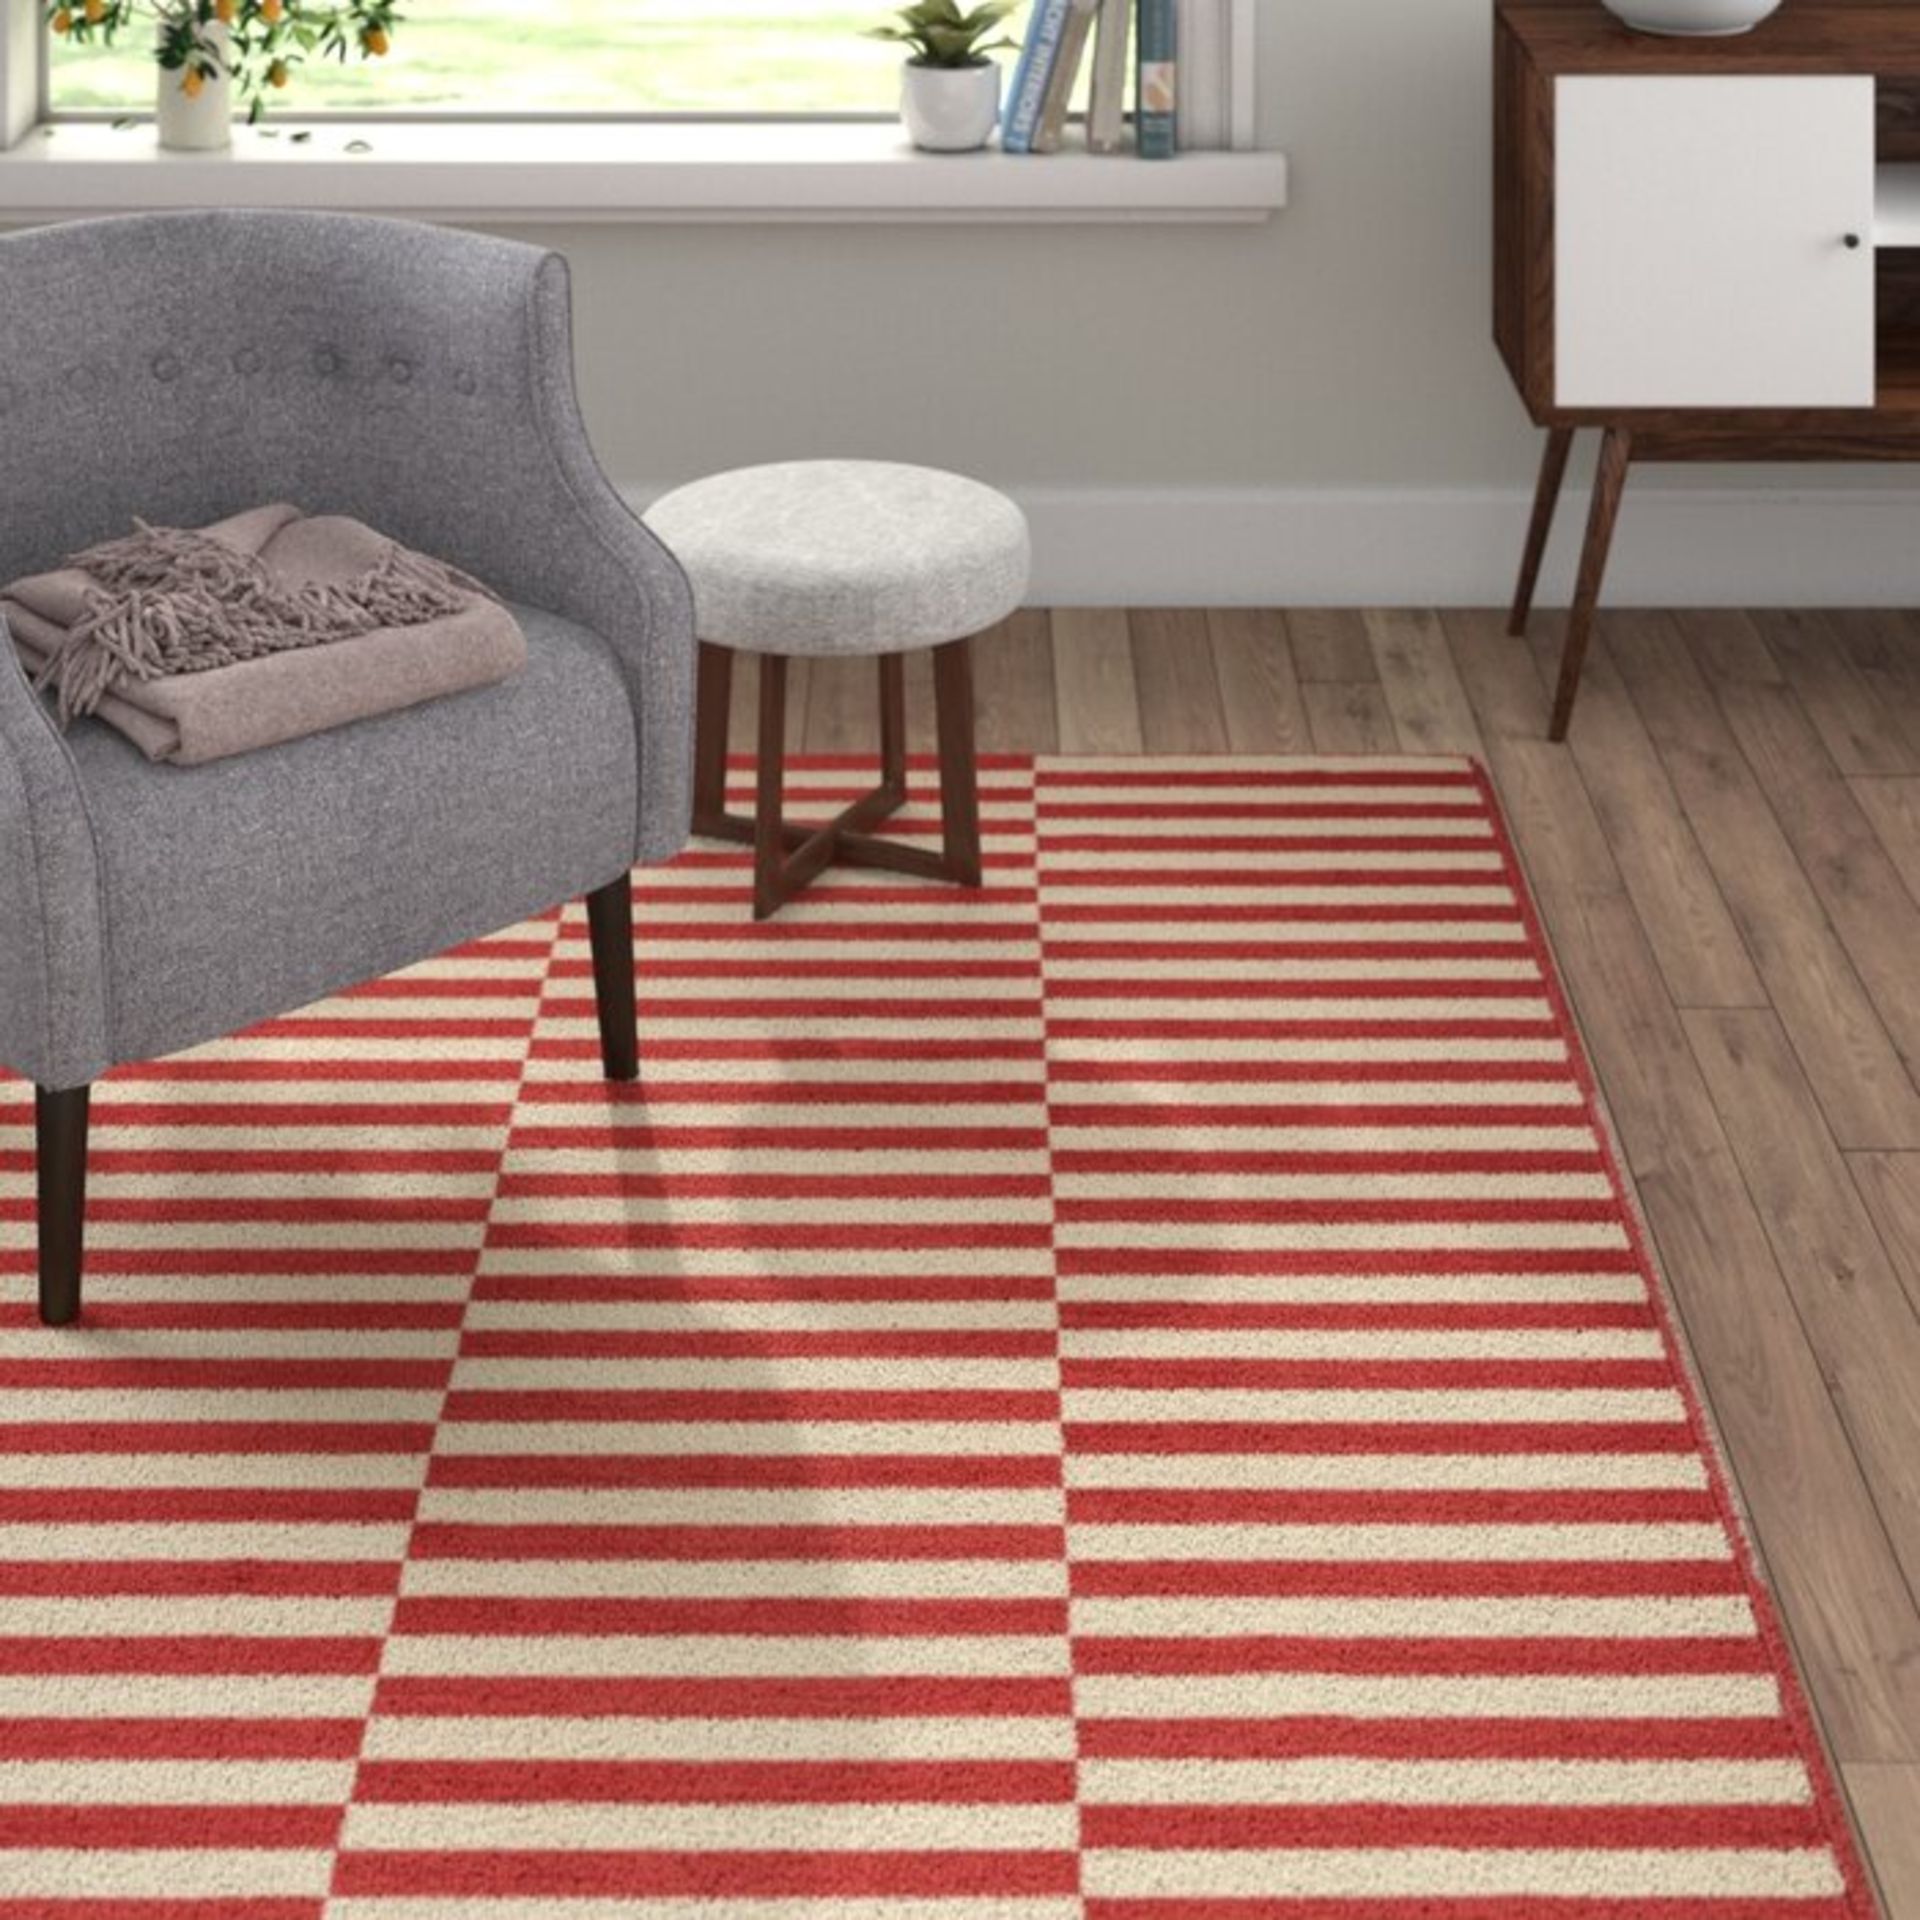 Panel Rug in Coral/Cream - RRP £34.99